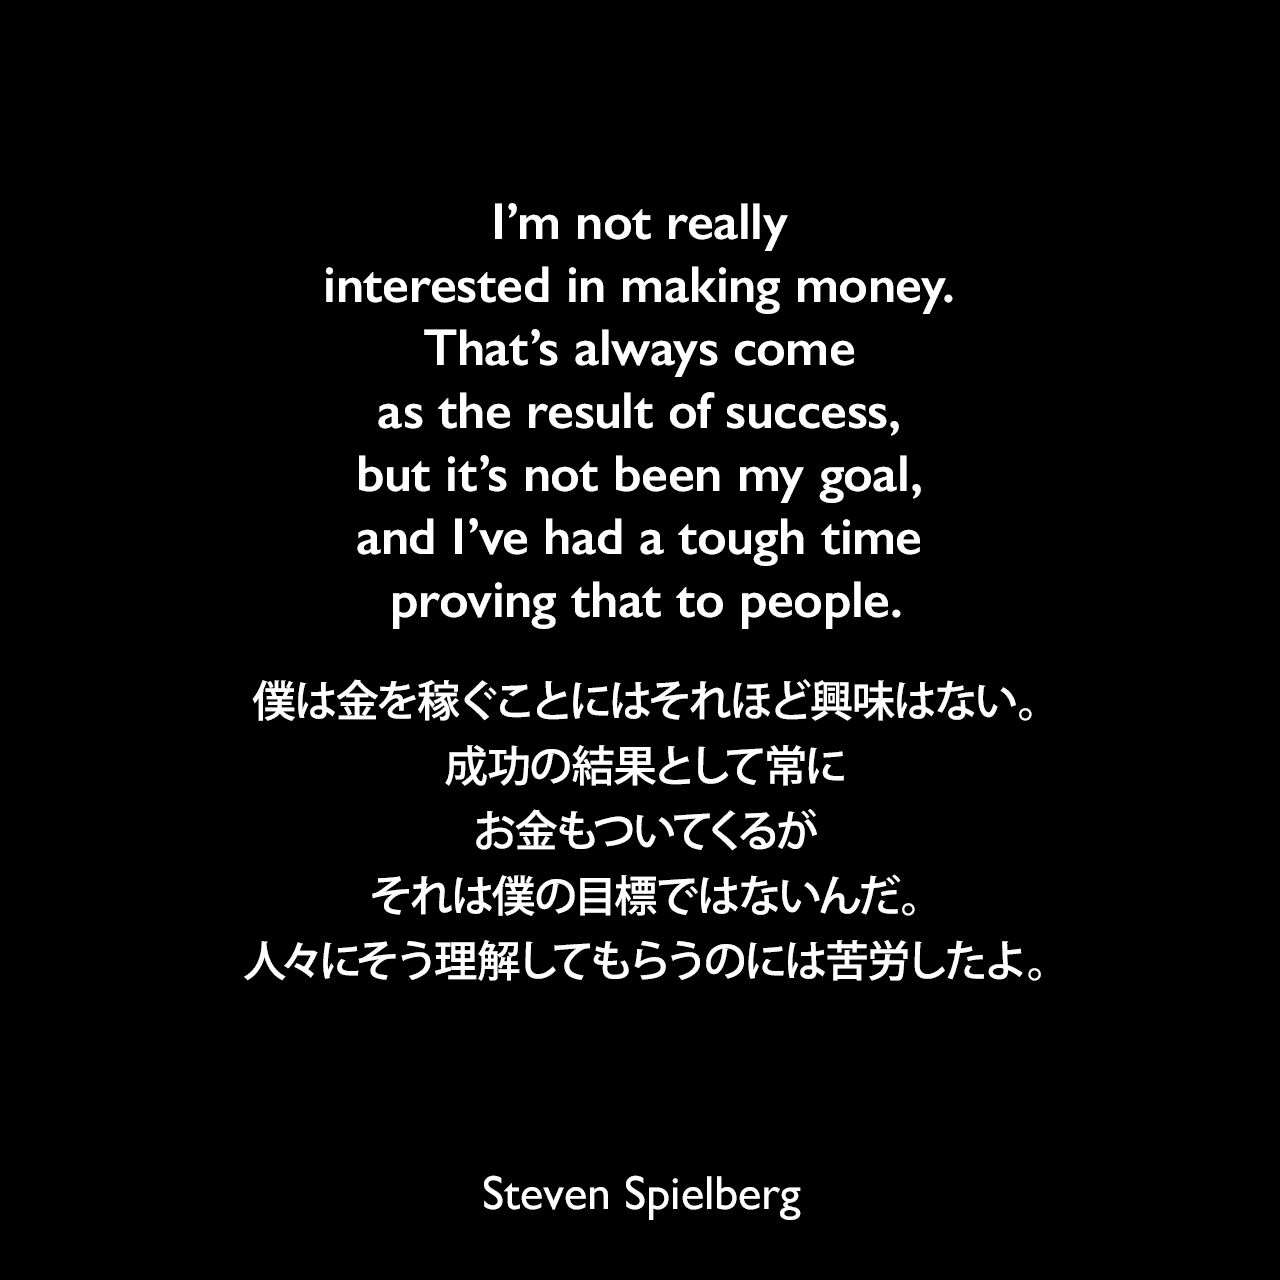 I’m not really interested in making money. That’s always come as the result of success, but it’s not been my goal, and I’ve had a tough time proving that to people.僕は金を稼ぐことにはそれほど興味はない。成功の結果として常にお金もついてくるが、それは僕の目標ではないんだ。人々にそう理解してもらうのには苦労したよ。Steven Spielberg